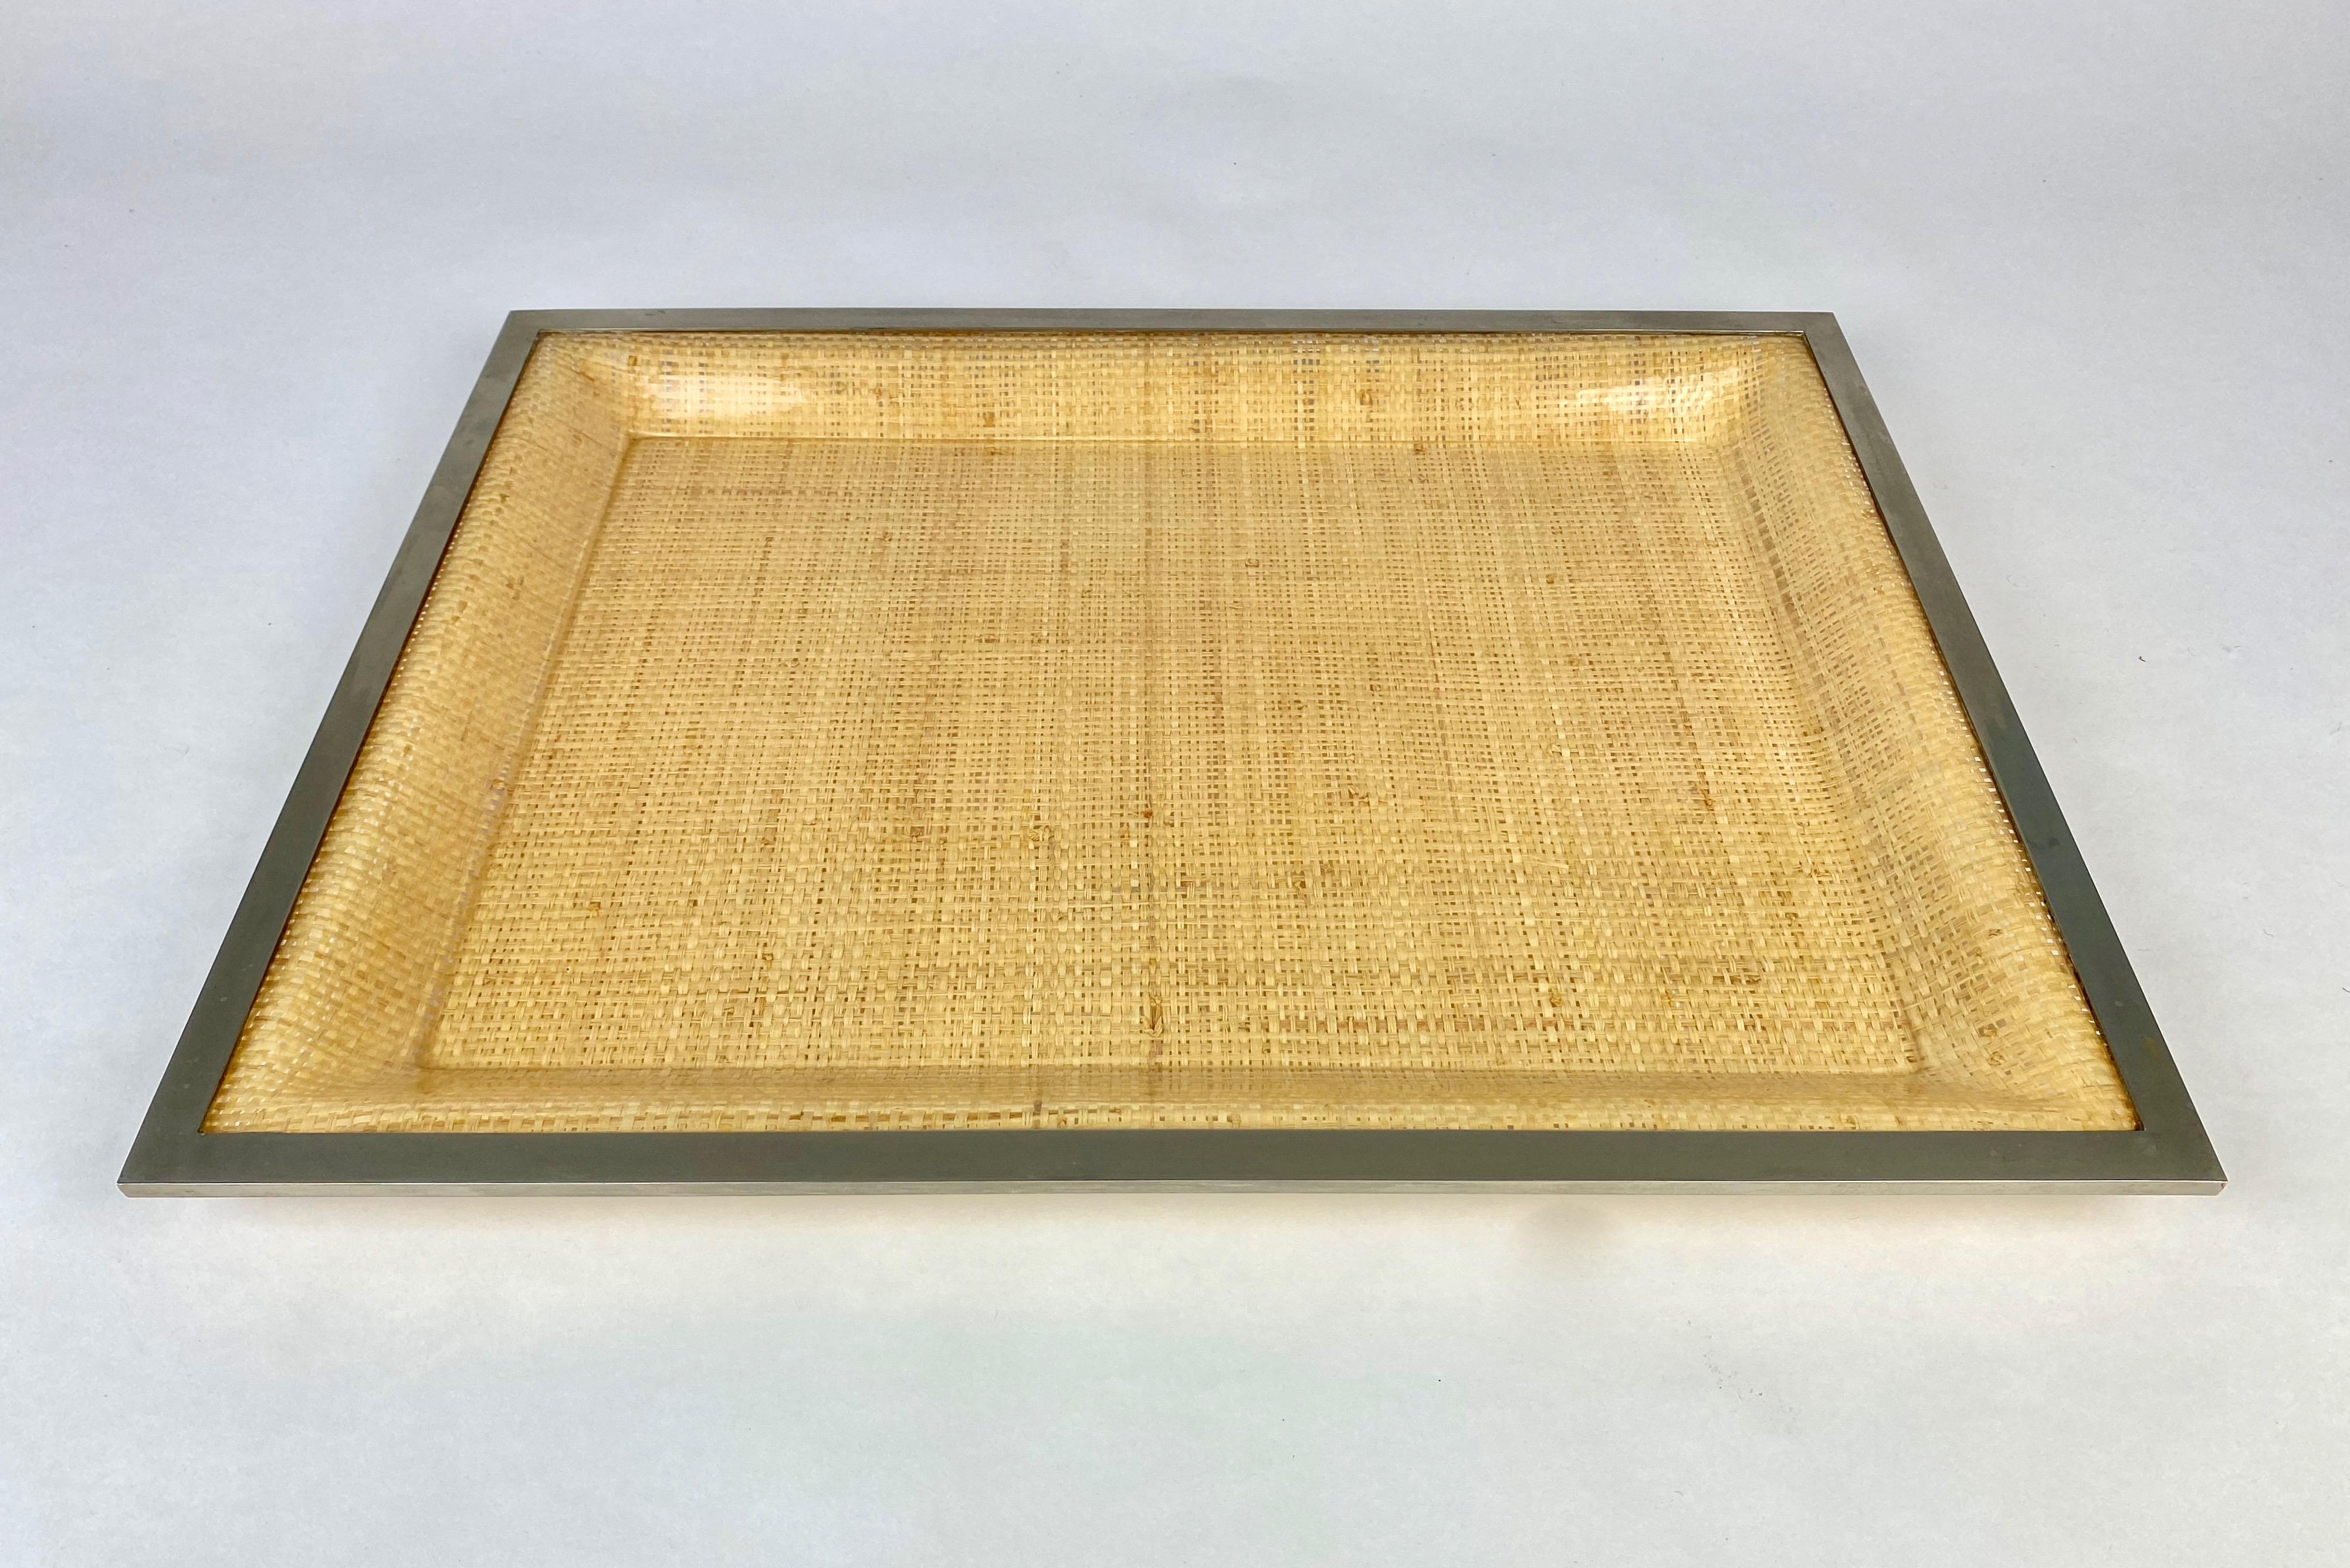 Wicker Lucite Serving Tray Metal Frame by Janetti, Italy, 1970s In Good Condition For Sale In Rome, IT